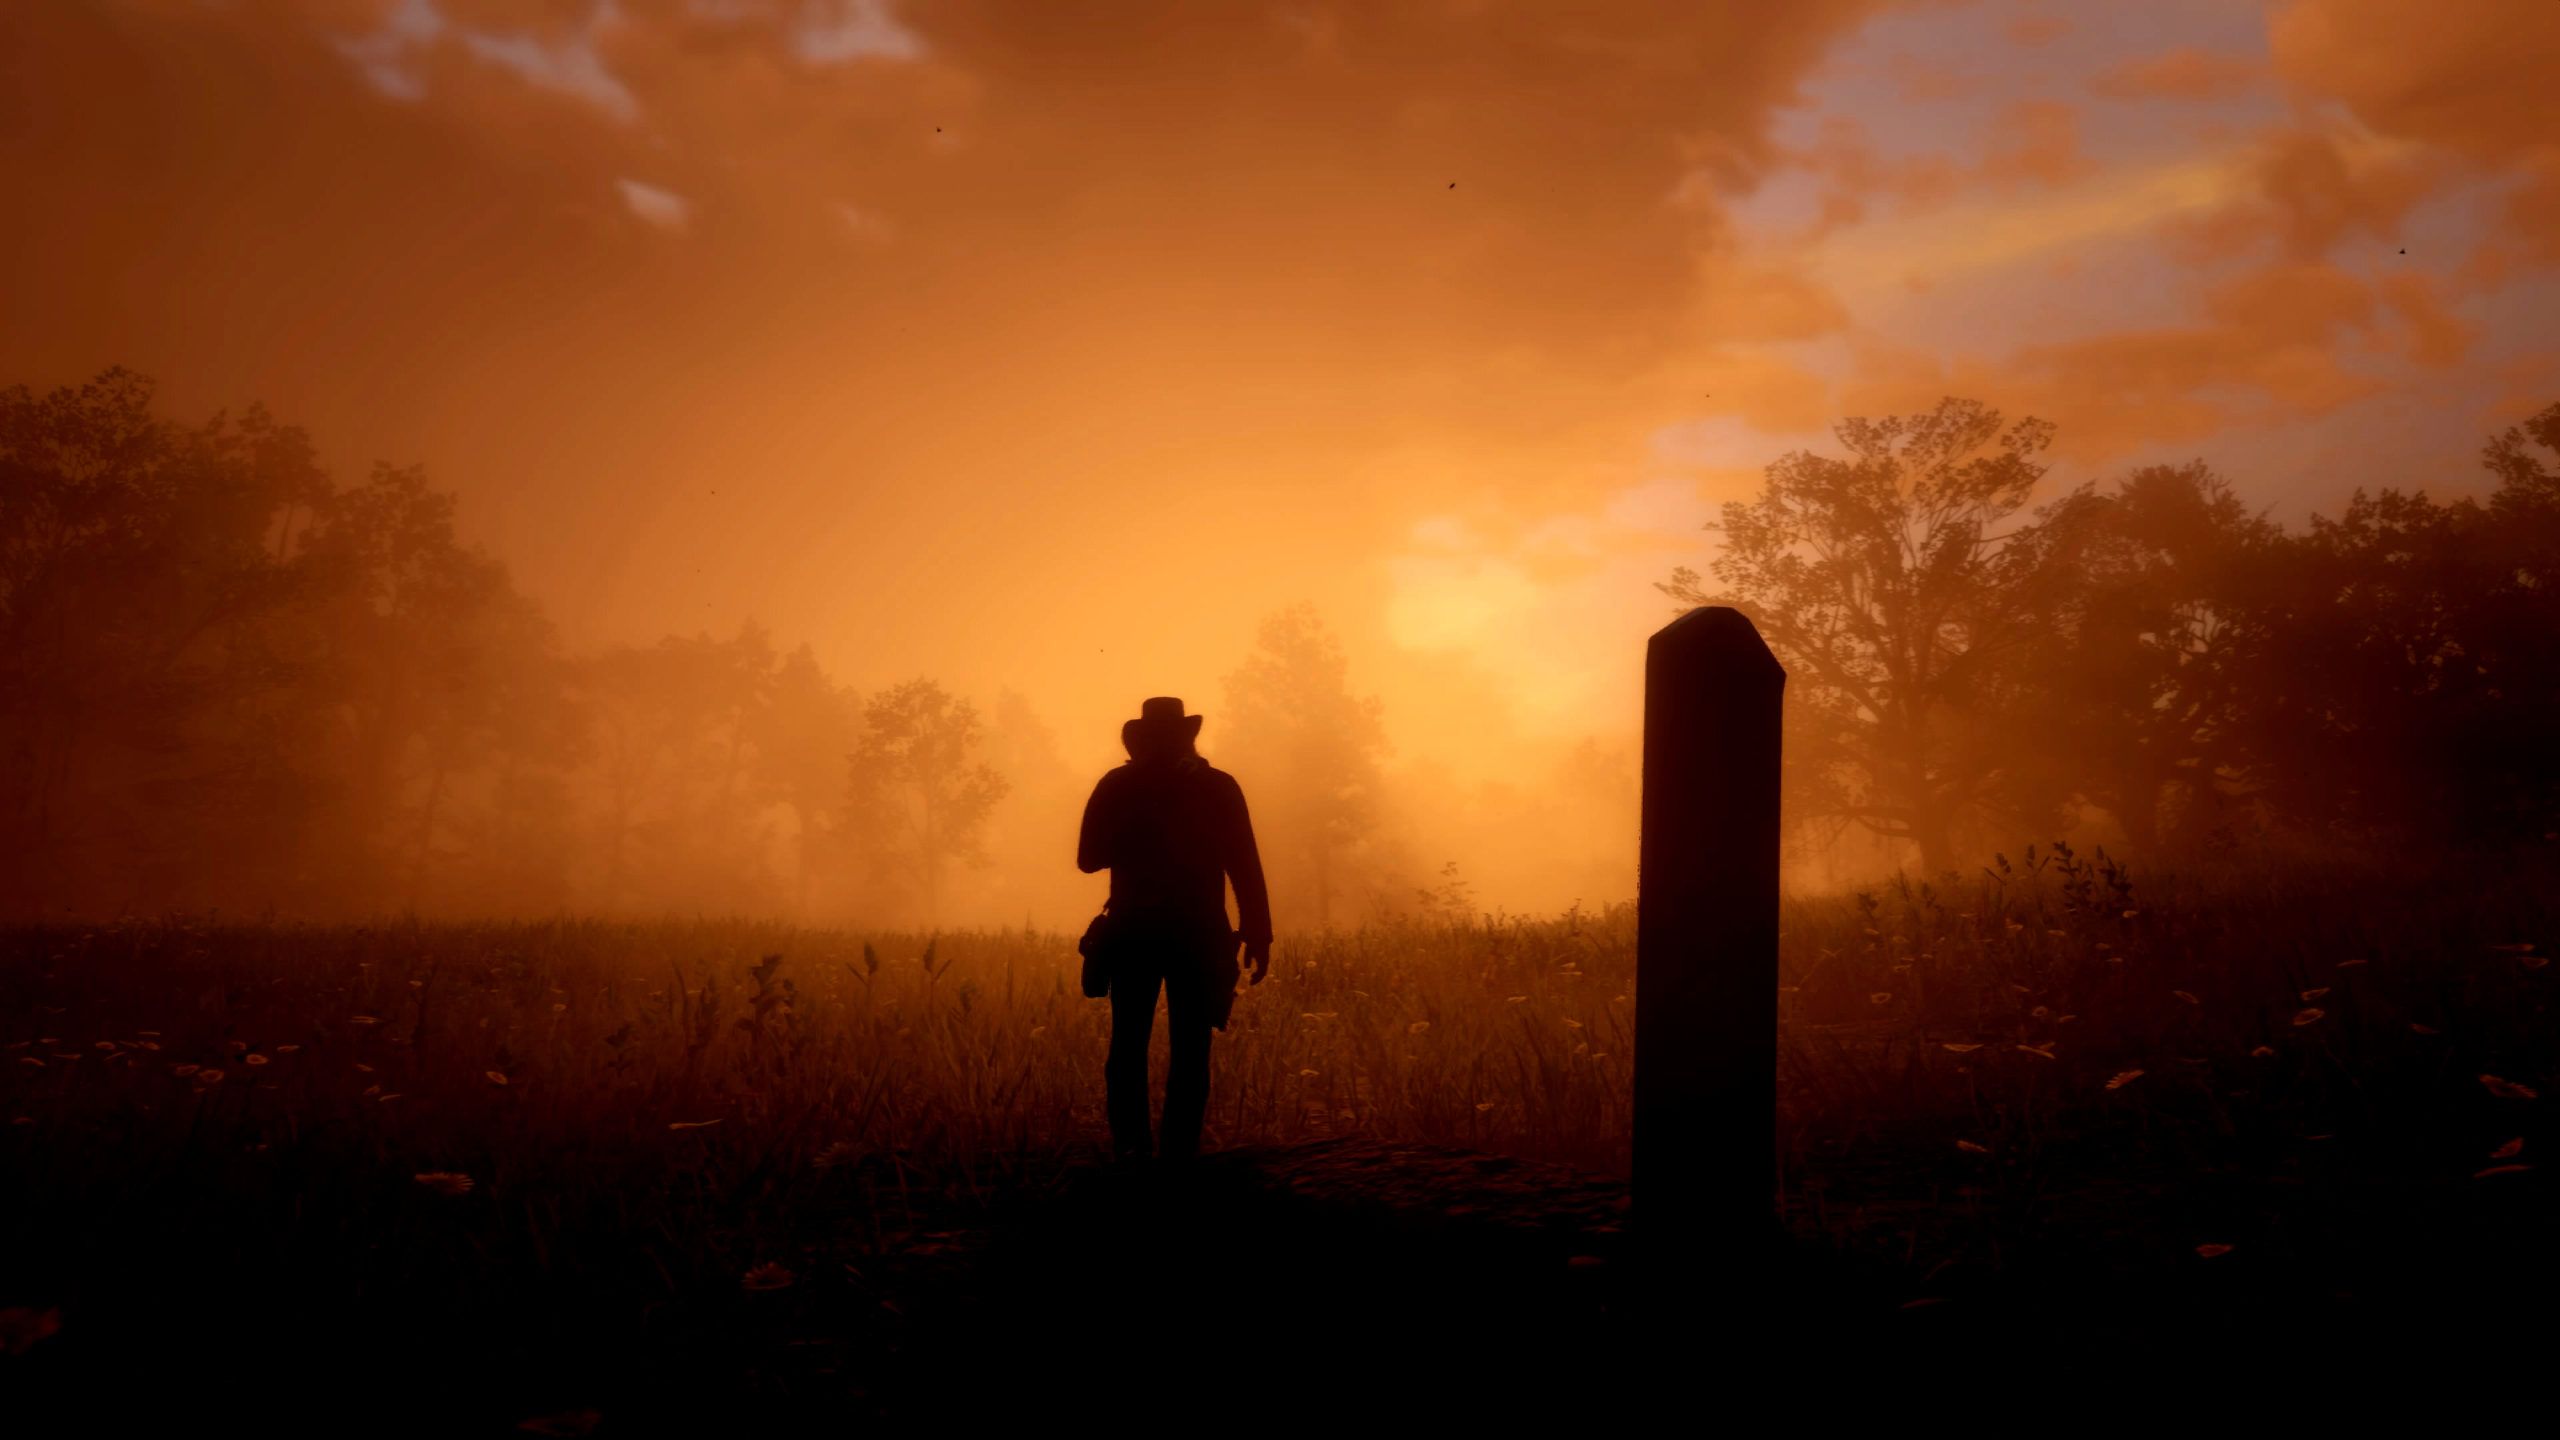 Red Dead Redemption 2 Wallpaper free download in 4k resolution, 1080p Indian Wire